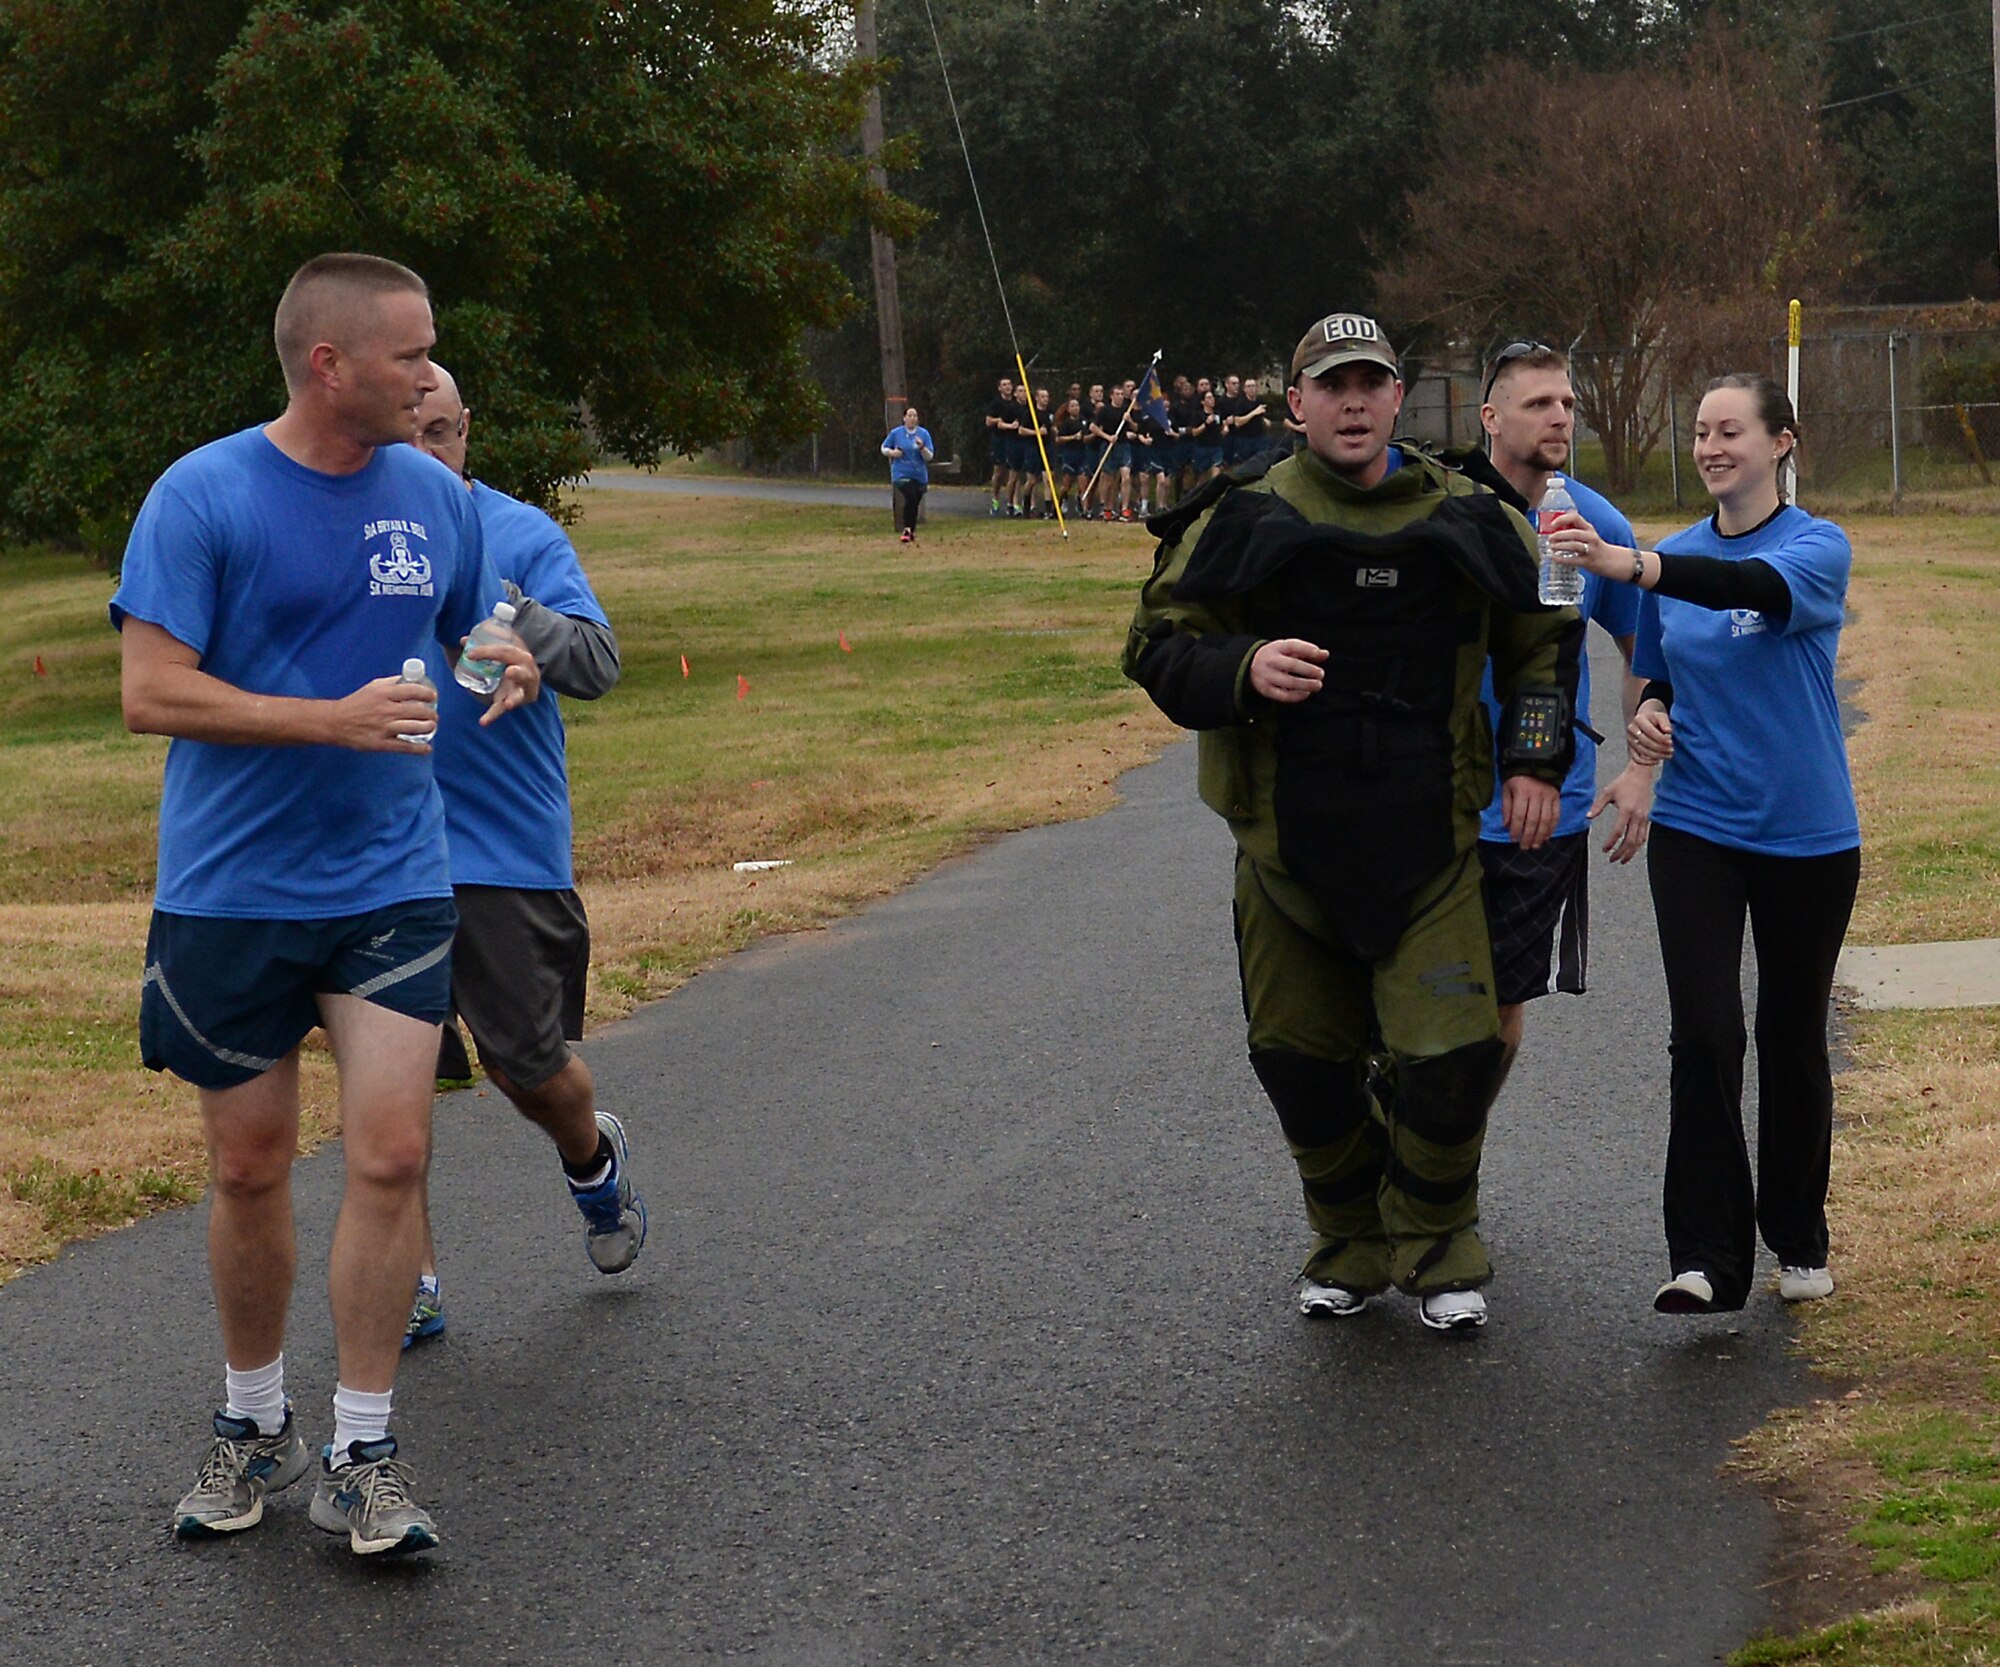 Alaina Bell, widow of the late Senior Airman Bryan Bell, offers water to Staff Sgt. Jordan Burger, 2nd Civil Engineer Squadron Explosive Ordnance Disposal technician, as he prepares to enter the final leg of the first SrA Bryan R. Bell 5K Memorial Run on Barksdale Air Force Base, La., Dec. 5, 2014. Bell, 2 CES EOD technician, tragically lost his life from injuries sustained when his vehicle struck an improvised explosive device while supporting Operation Enduring Freedom in Afghanistan Jan. 5, 2012. (U.S. Air Force photo/Airman 1st Class Curt Beach)